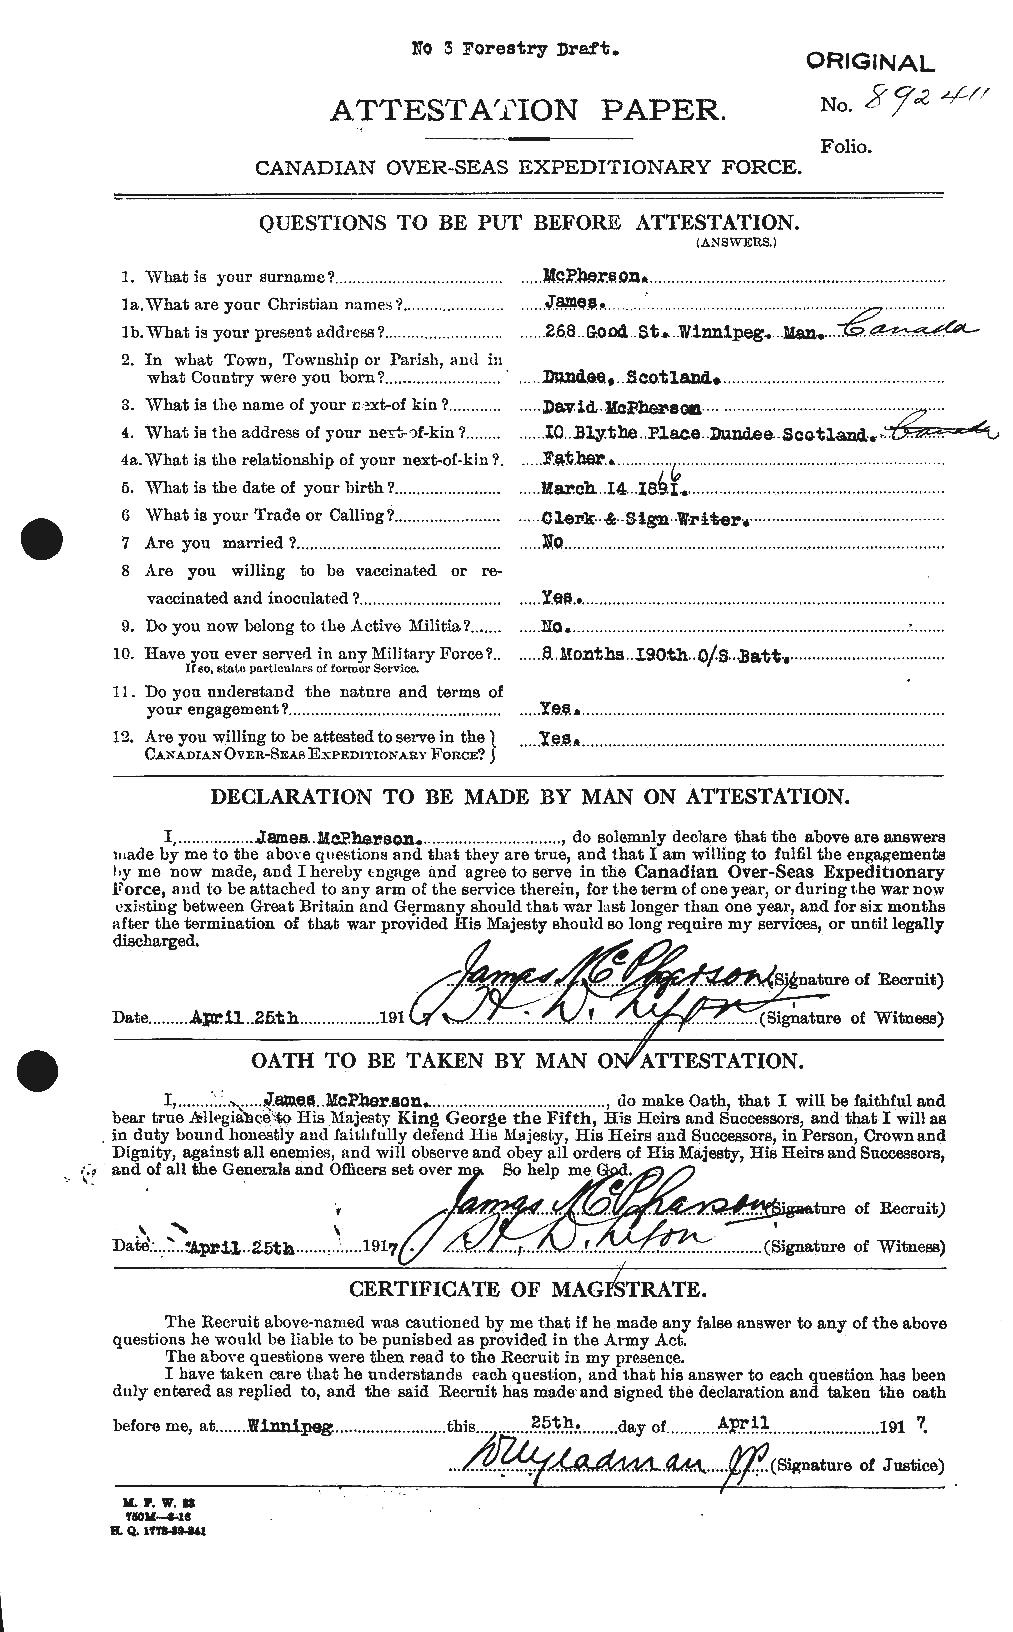 Personnel Records of the First World War - CEF 543068a